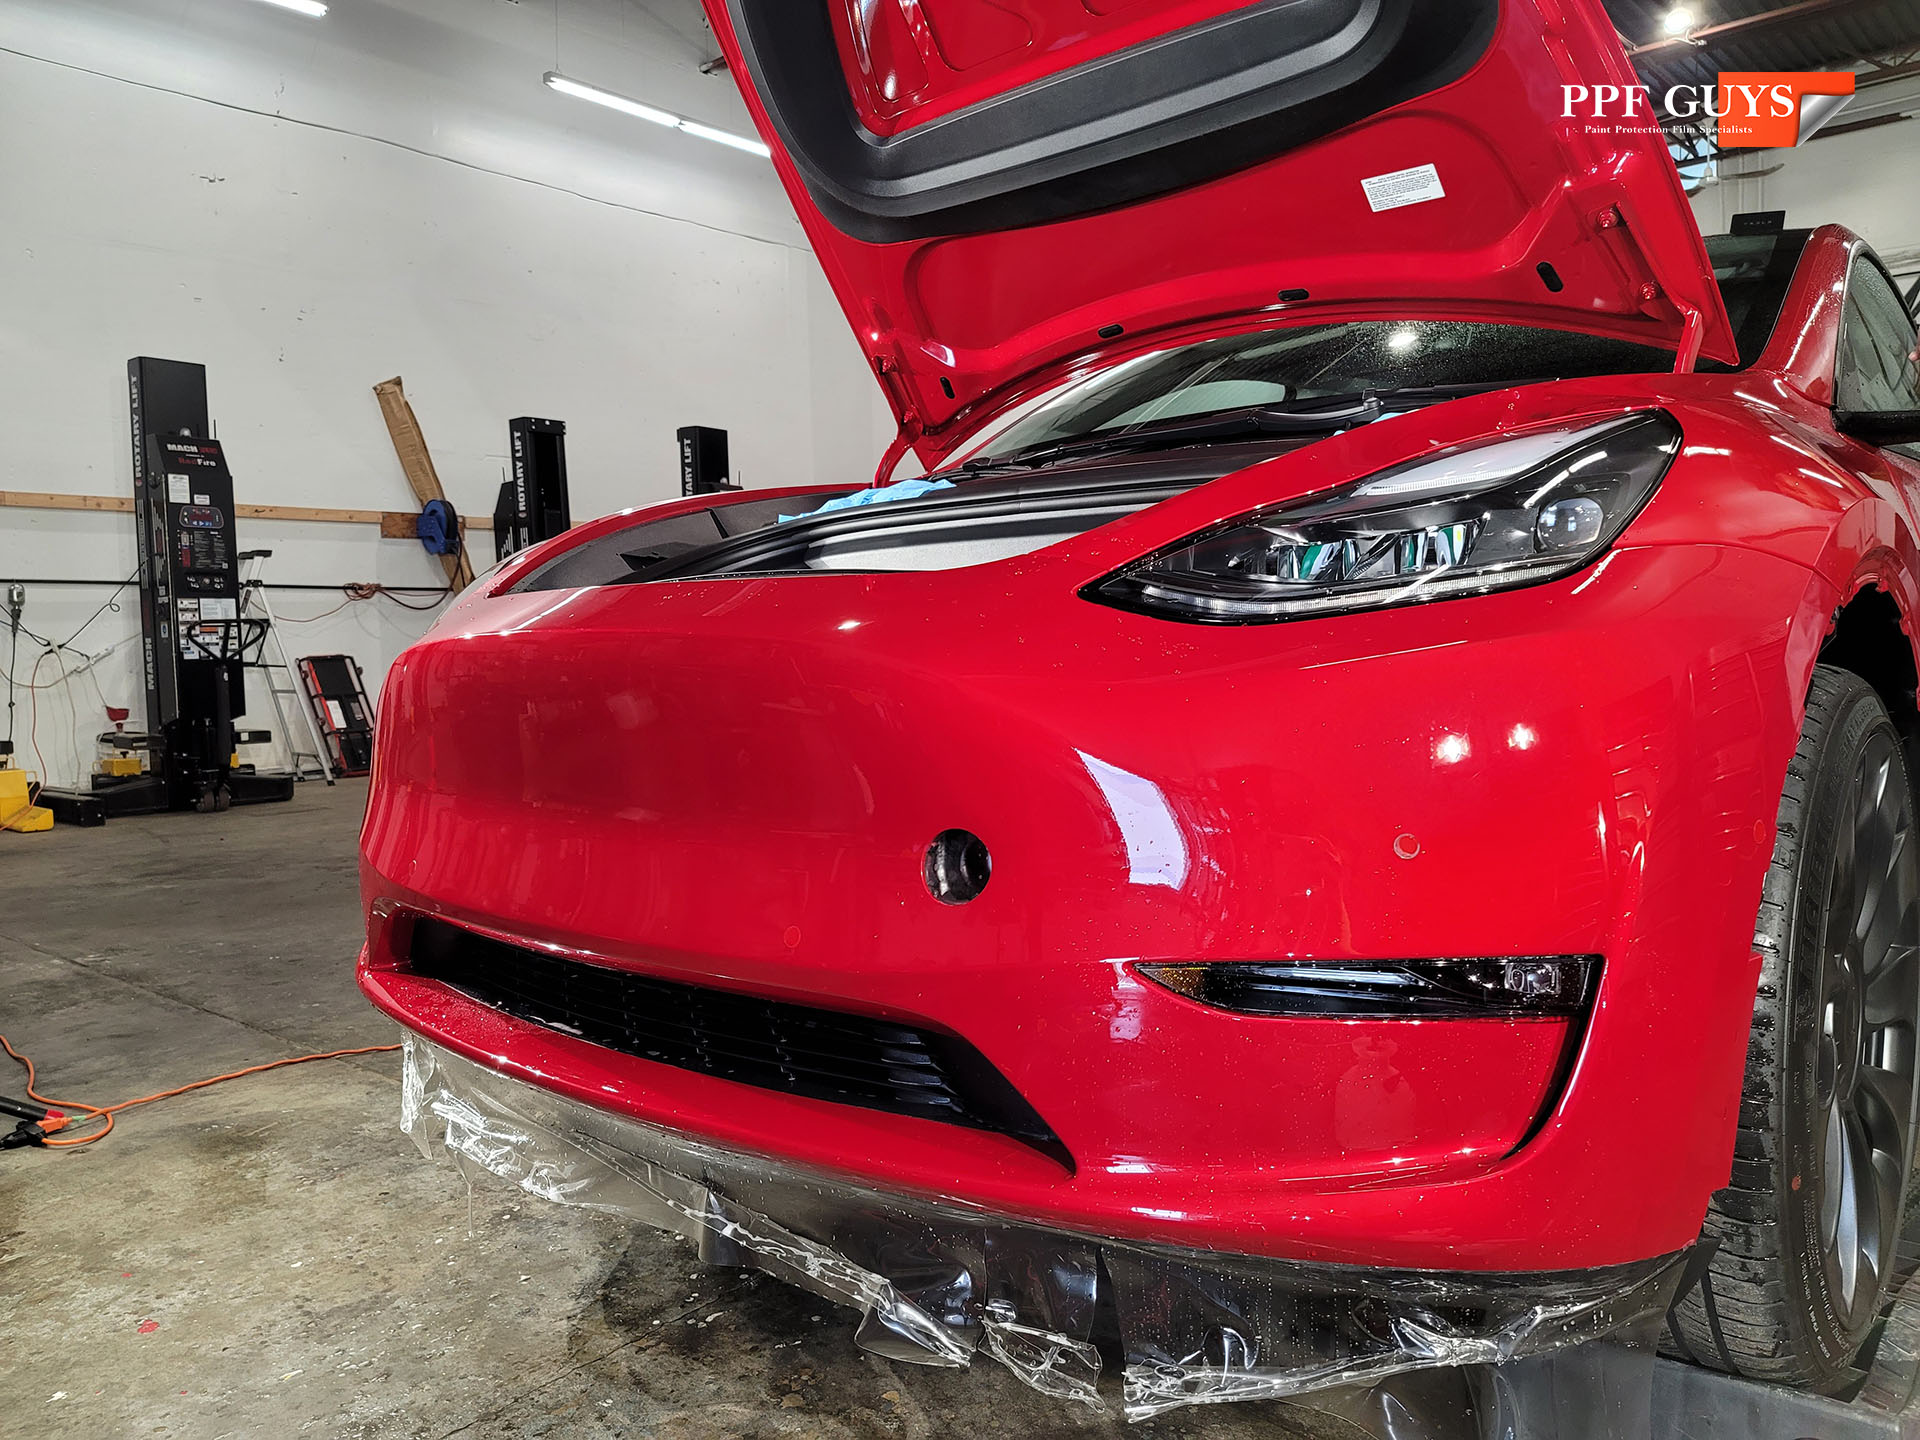 ppf guys model y red front end ppf and ceramic coating (2).jpg